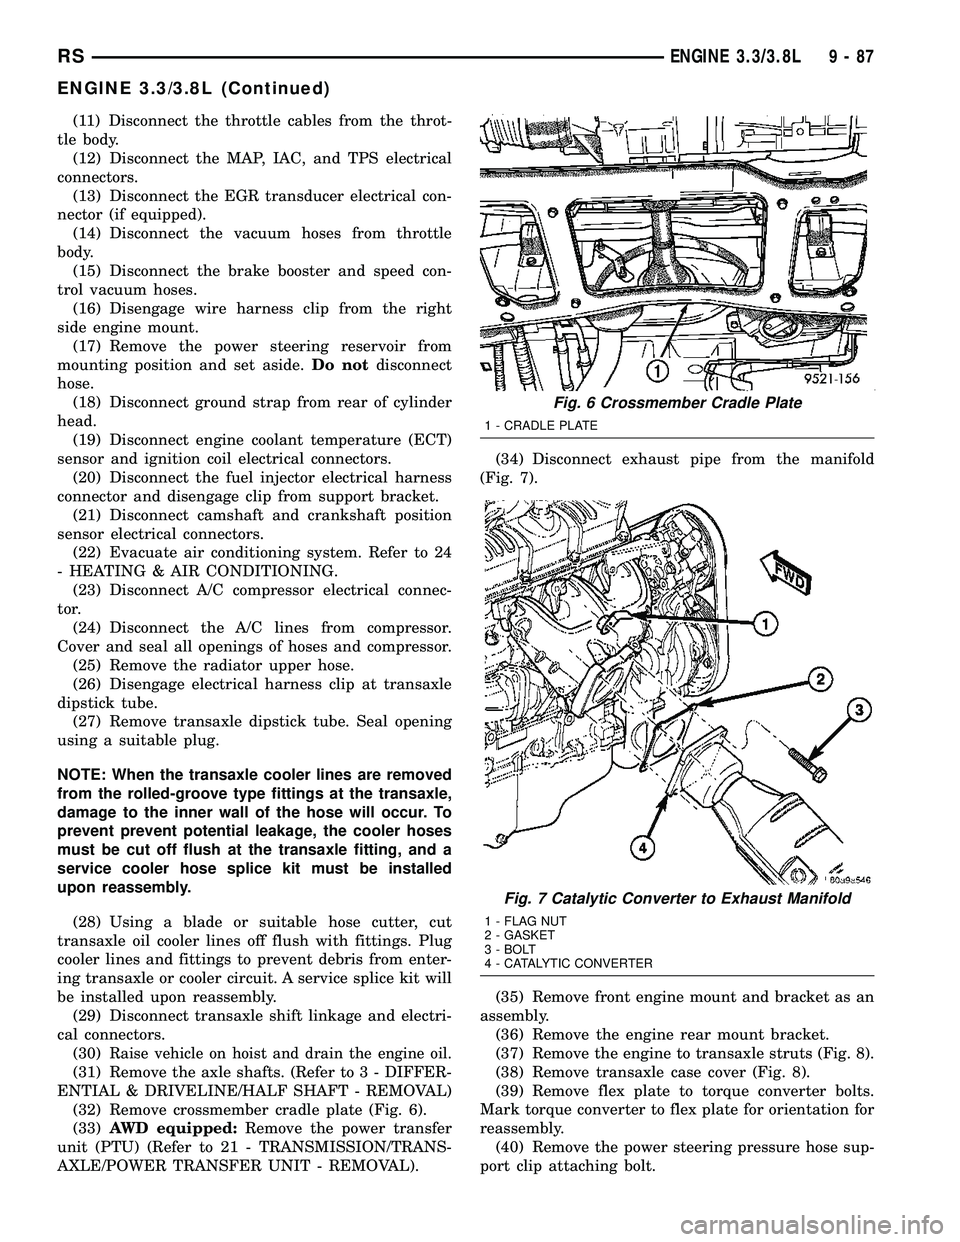 CHRYSLER VOYAGER 2004  Service Manual (11) Disconnect the throttle cables from the throt-
tle body.
(12) Disconnect the MAP, IAC, and TPS electrical
connectors.
(13) Disconnect the EGR transducer electrical con-
nector (if equipped).
(14)